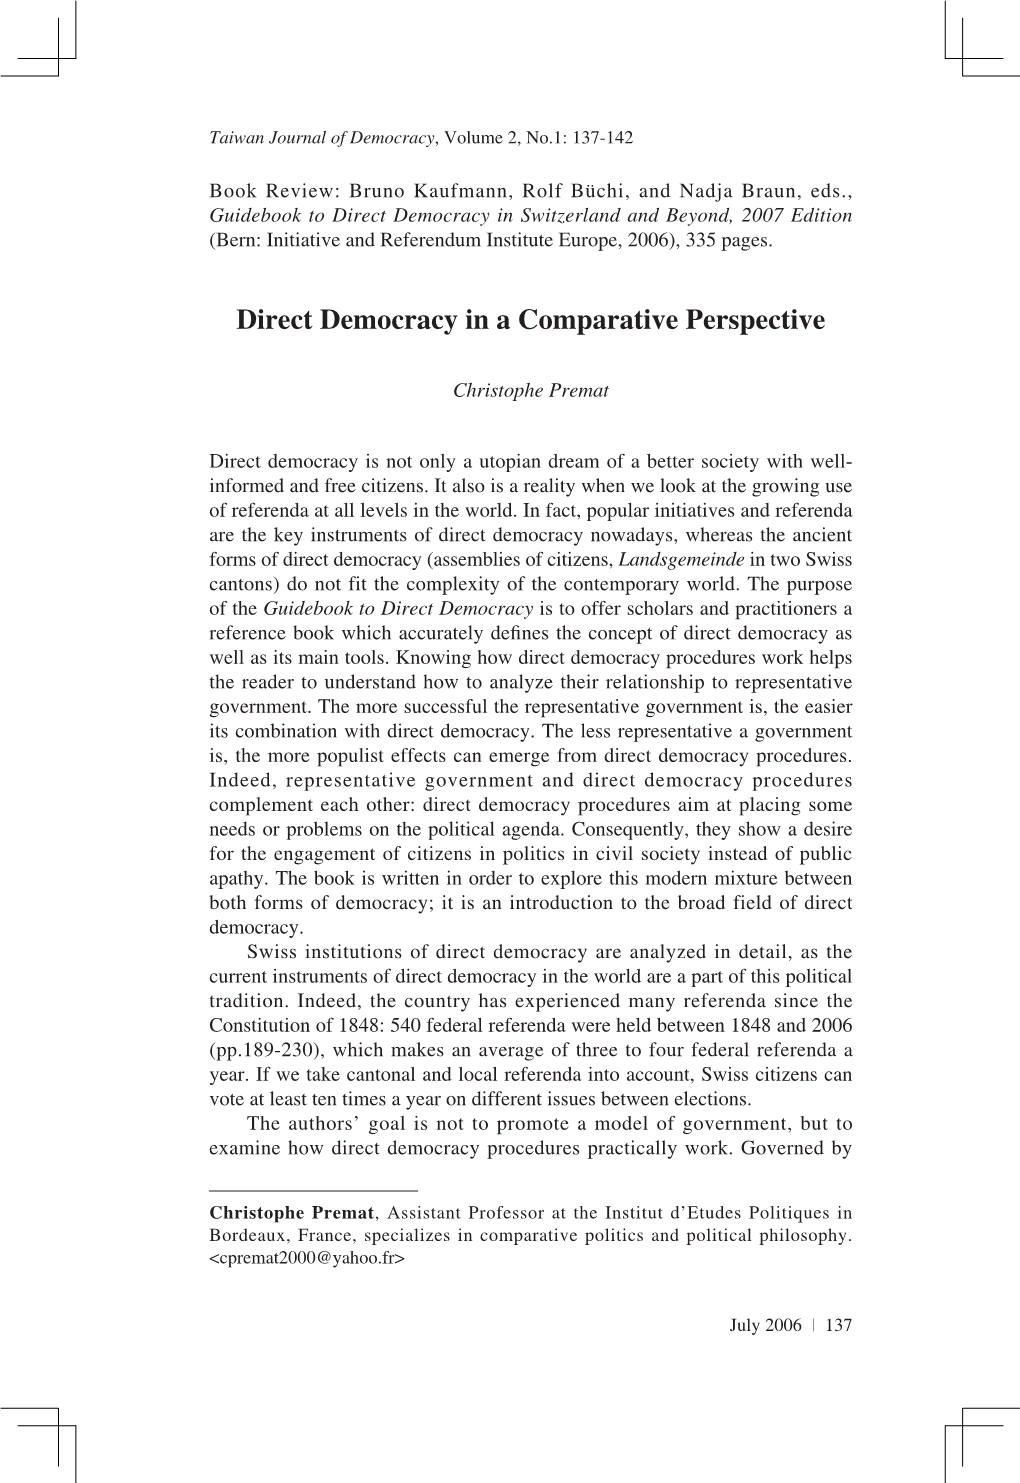 Direct Democracy in a Comparative Perspective